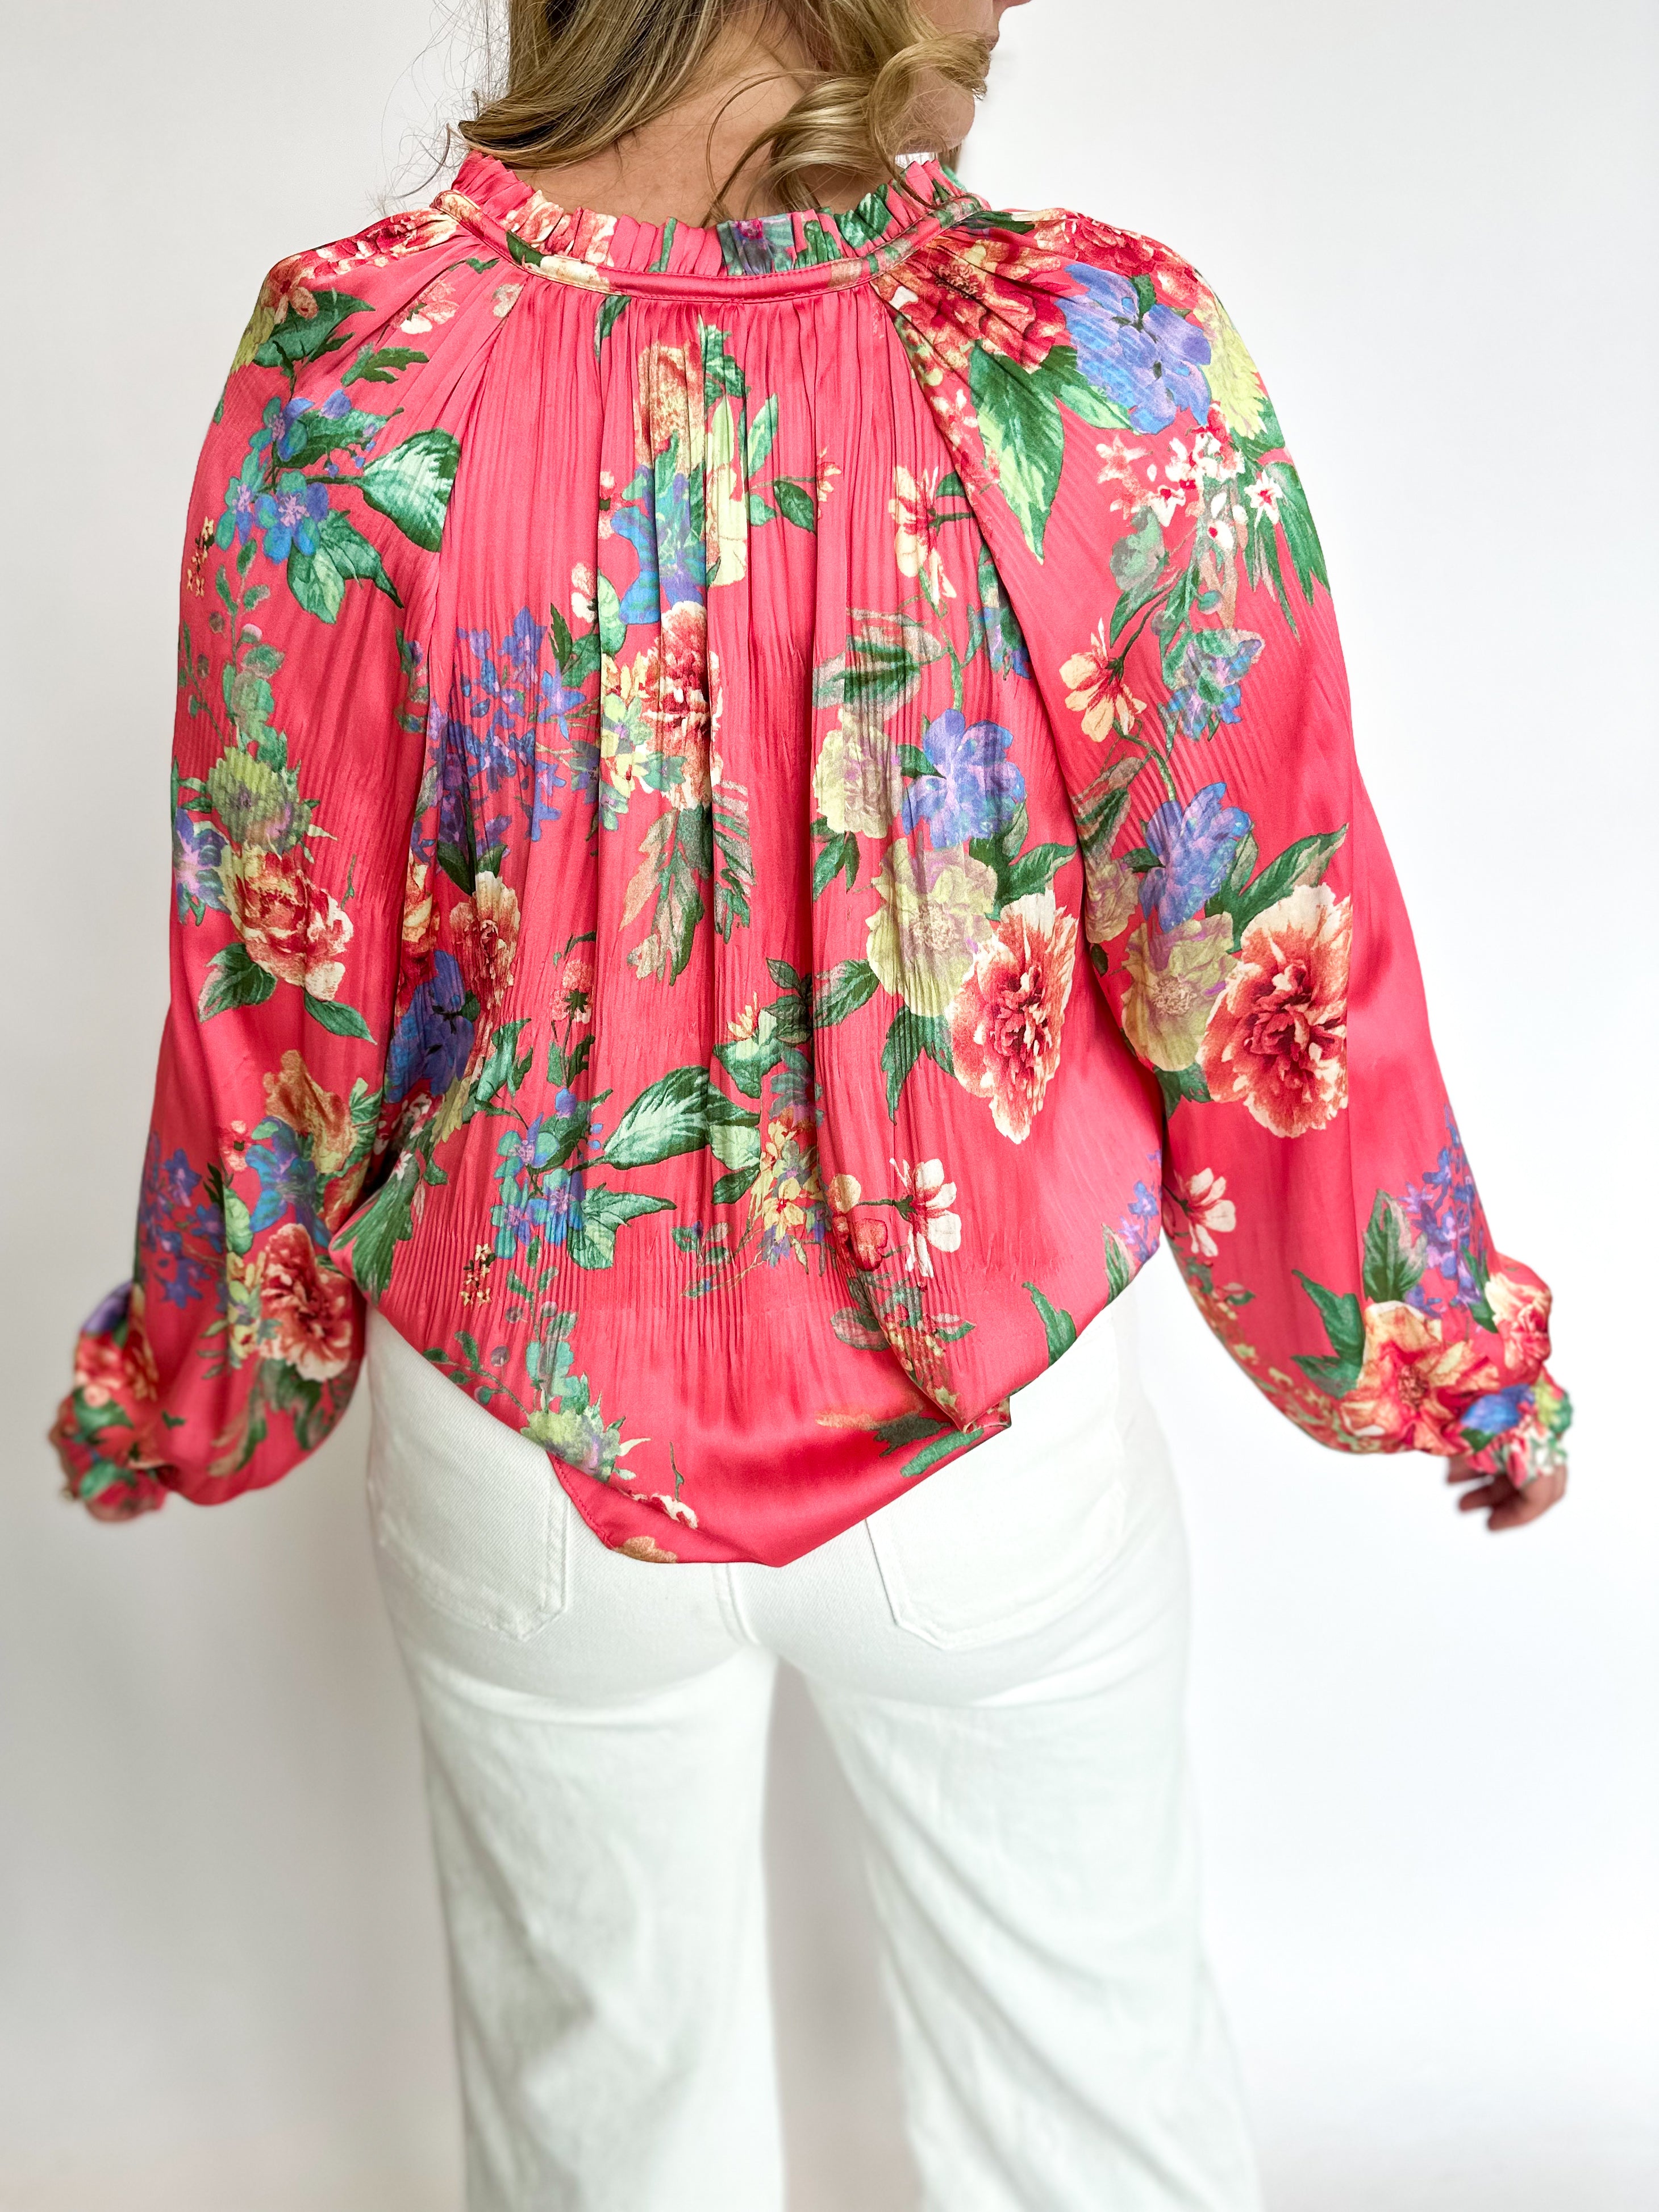 Coral Floral Blouse-200 Fashion Blouses-CURRENT AIR CLOTHING-July & June Women's Fashion Boutique Located in San Antonio, Texas